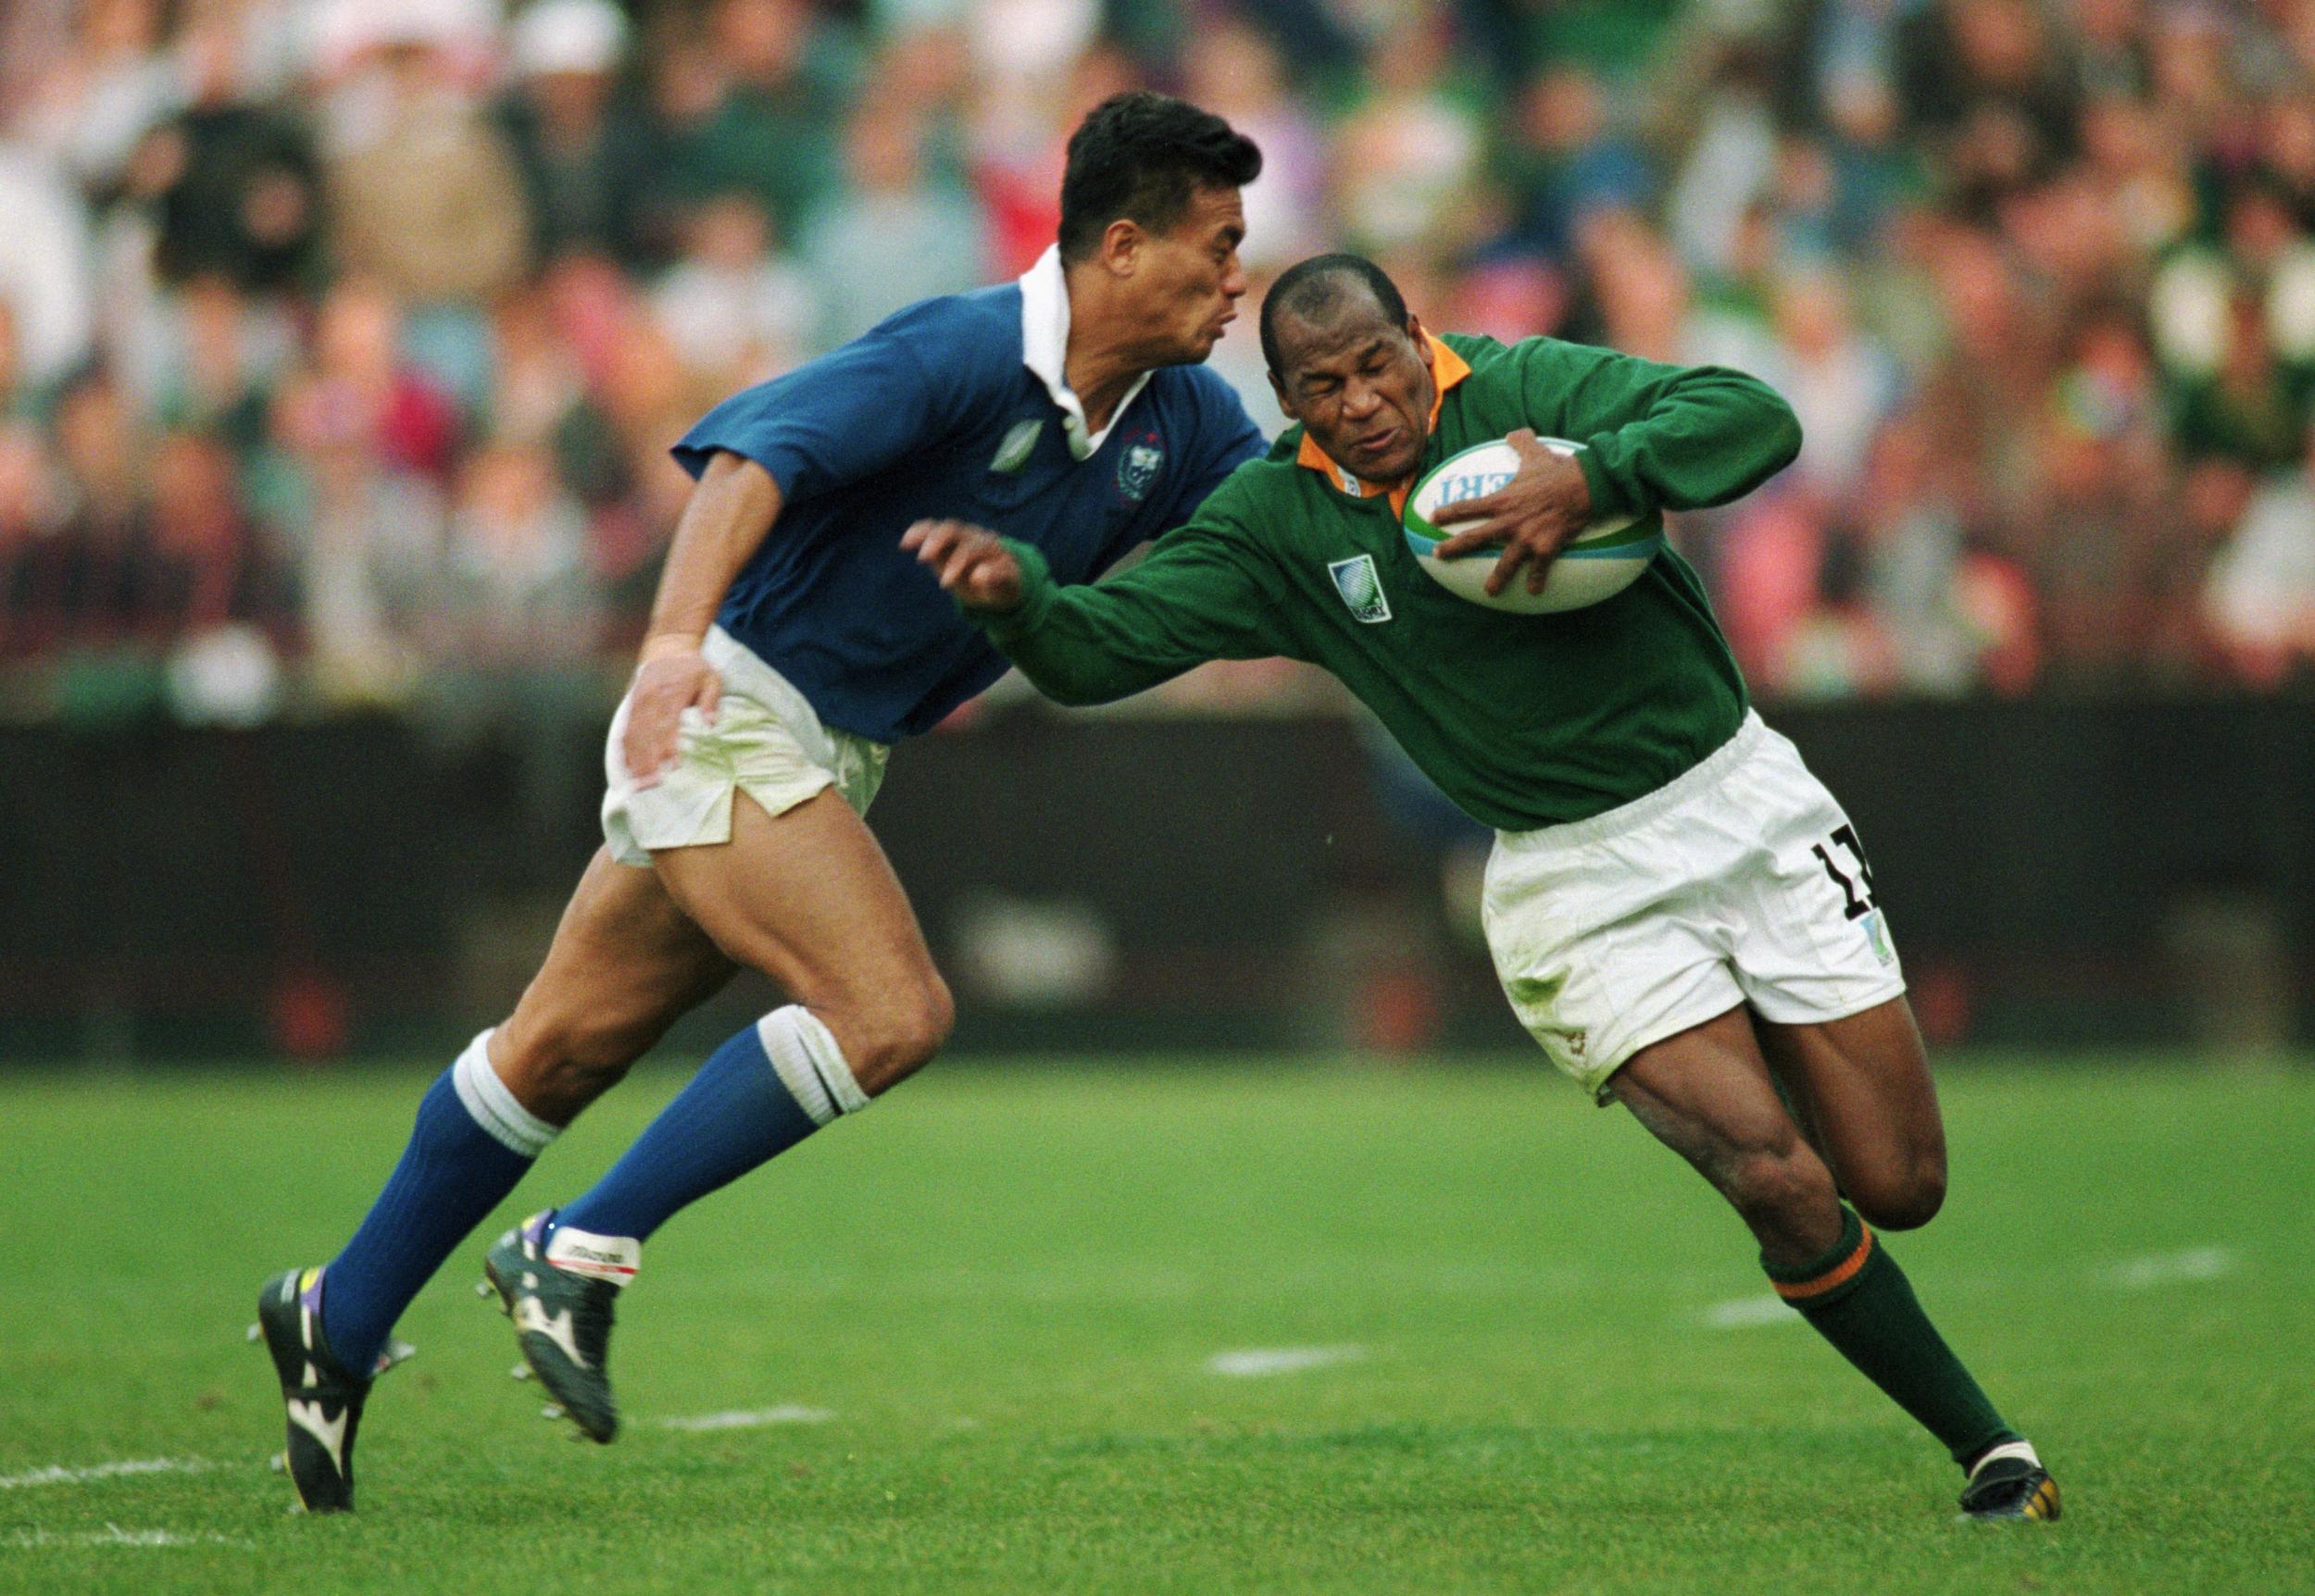 Chester Williams played for the Springboks throughout the 1990s and score four tries in the 1995 Rugby World Cup semi-final win over Samoa